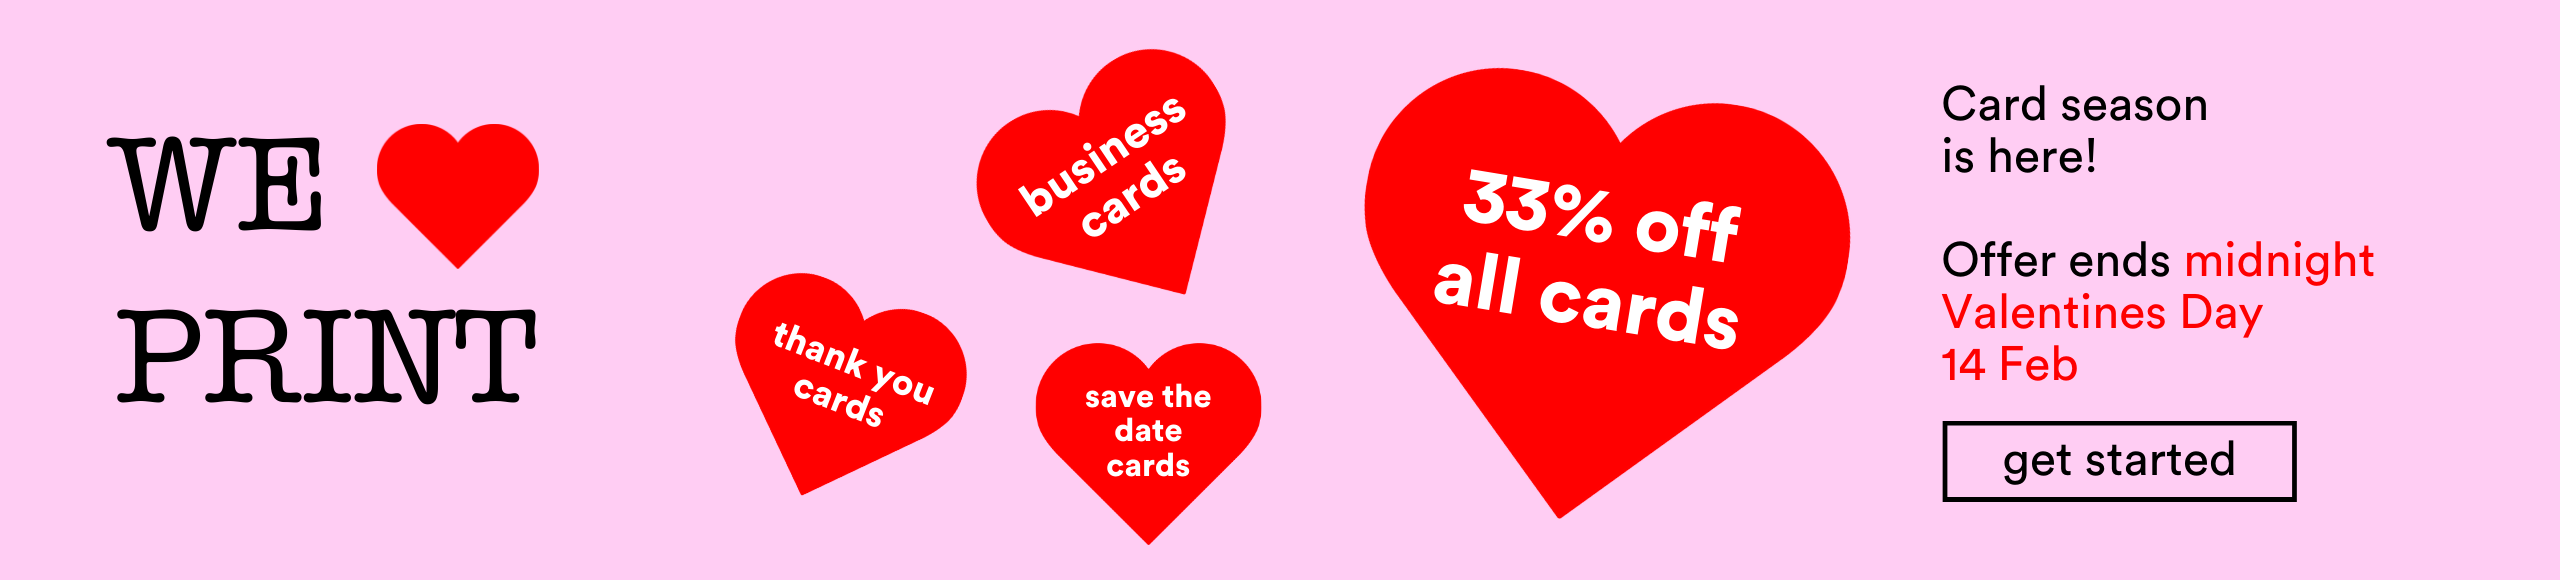 33% off all business cards, all save the date cards and all thank you cards